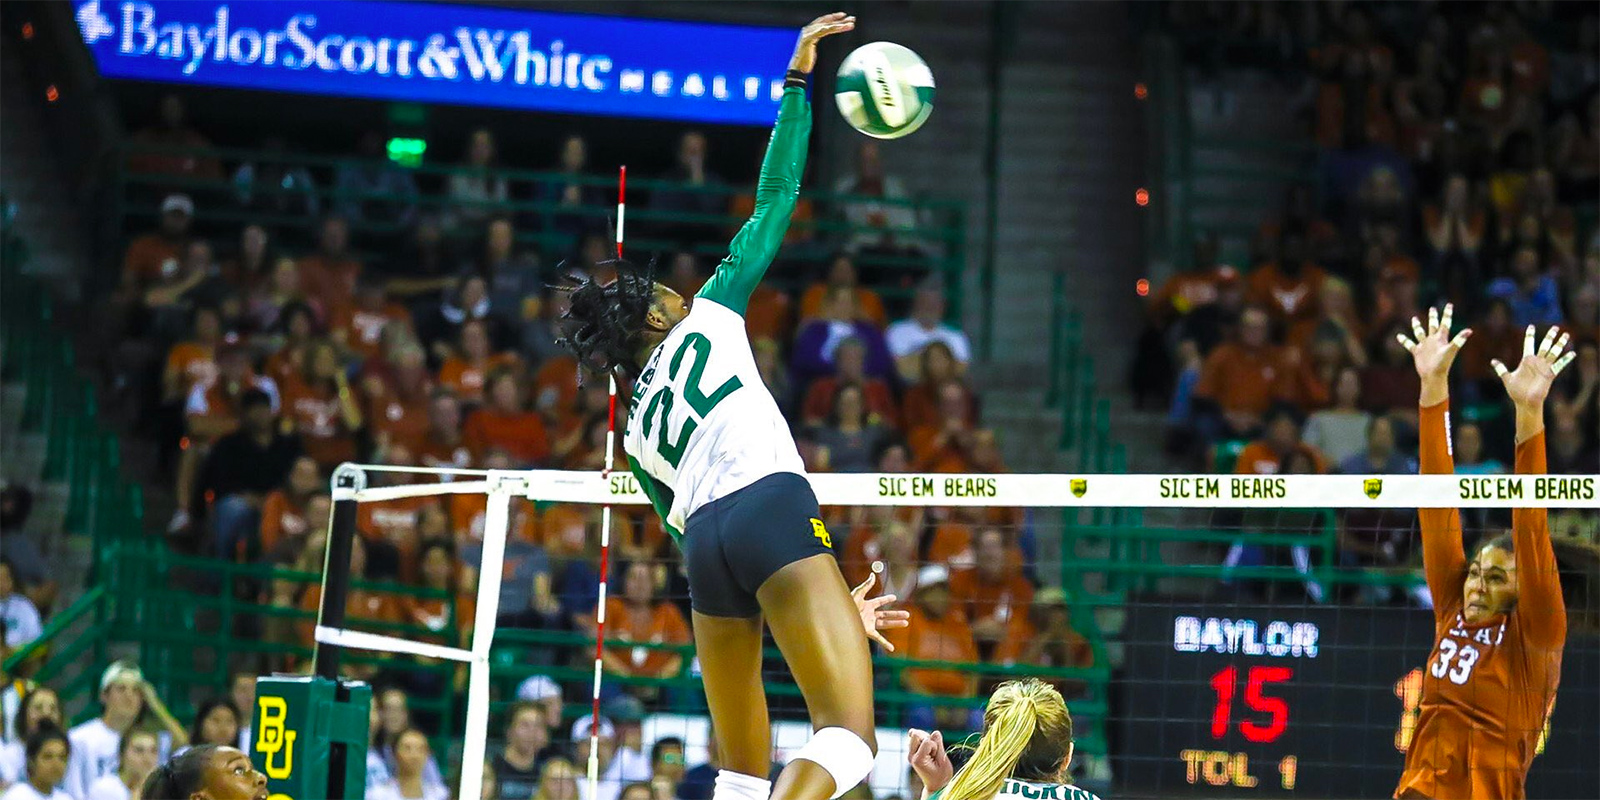 Baylor volleyball's Yossiana Pressley goes for the kill against Texas